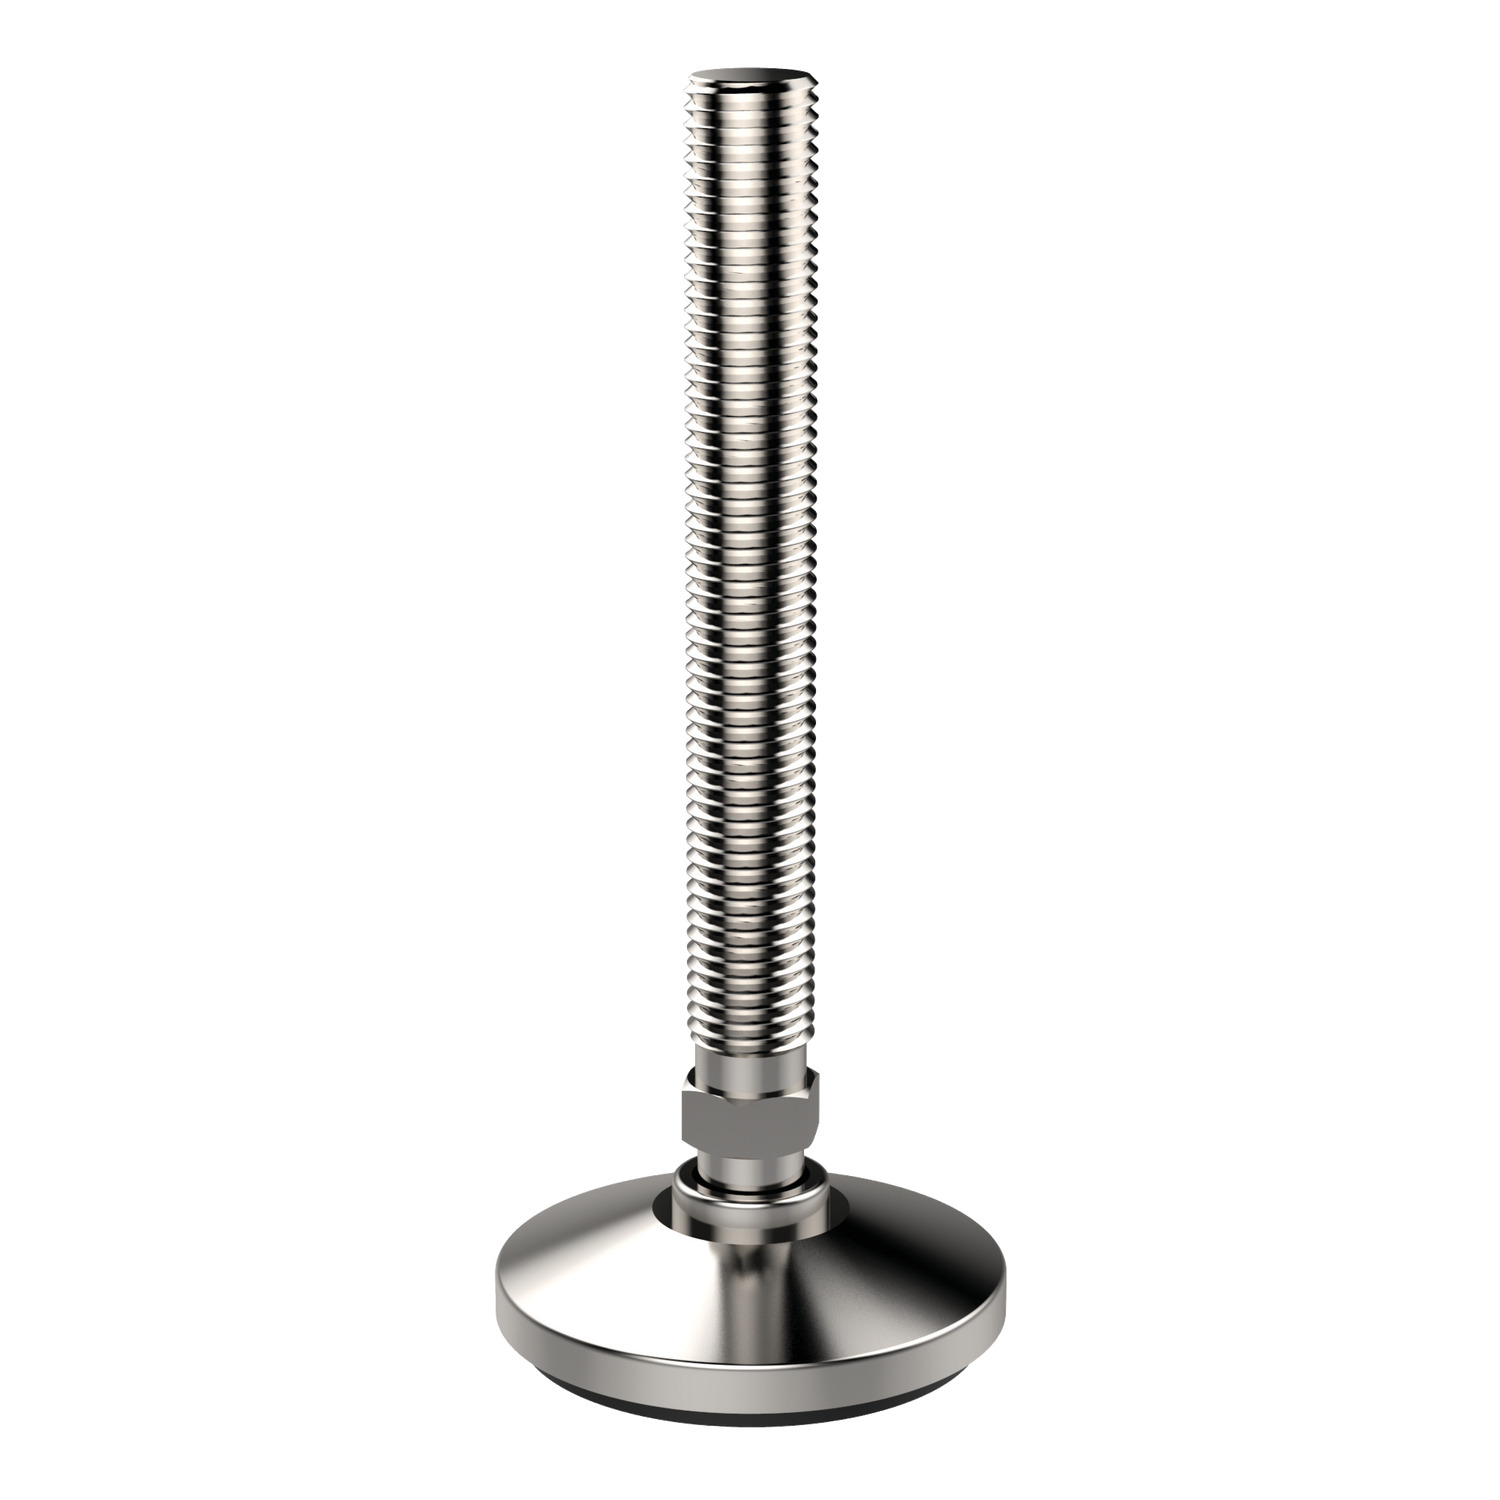 34711.W0200 Levelling Feet Pad & bolt stainless steel - M20 - 125. Also known as W4100.AC0200